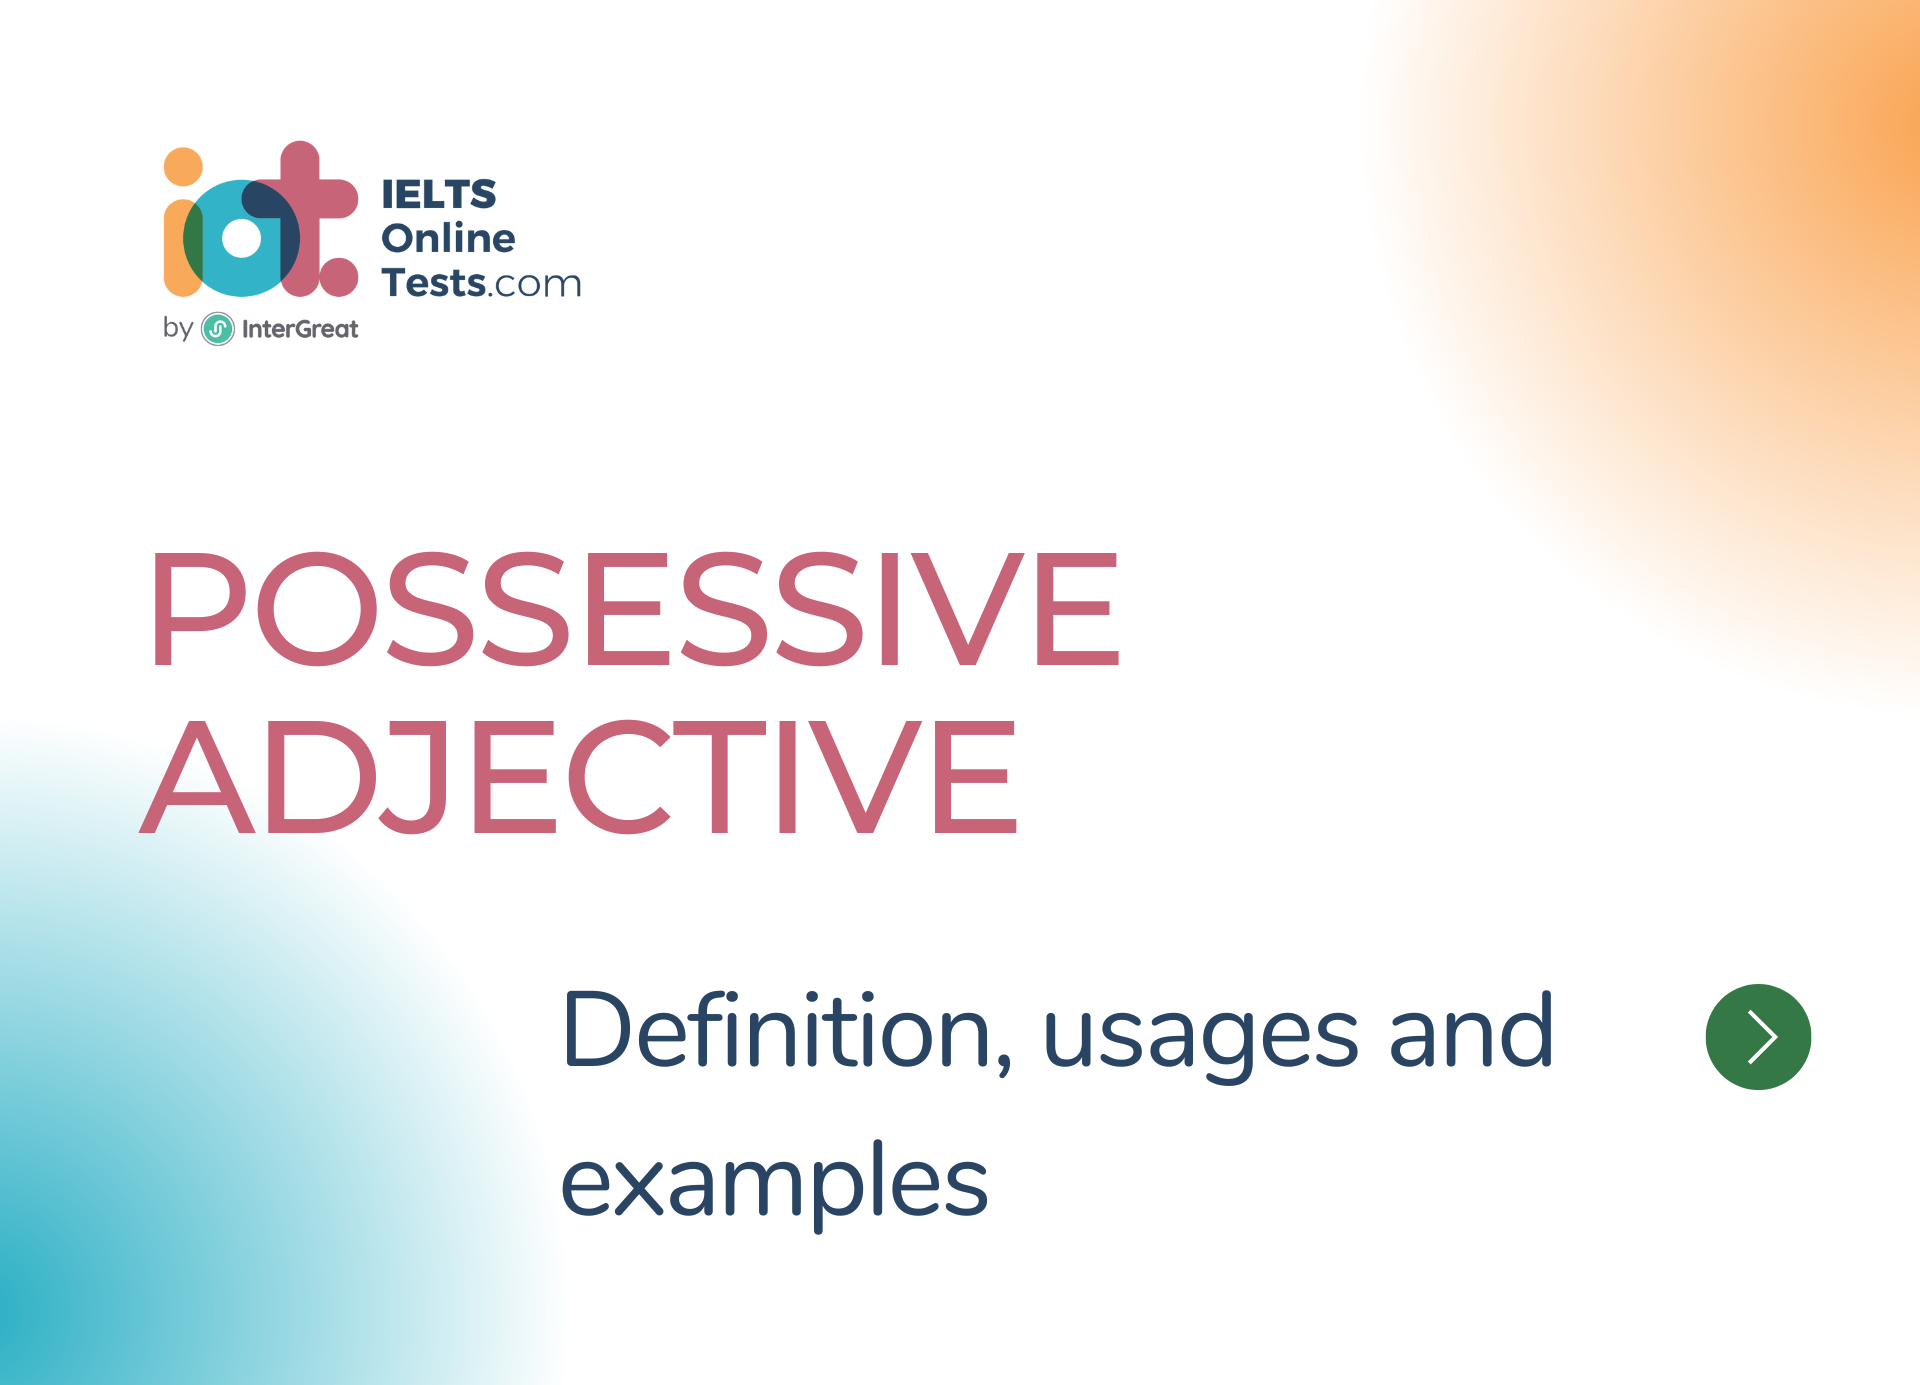 Possessive adjective definition, usages and examples